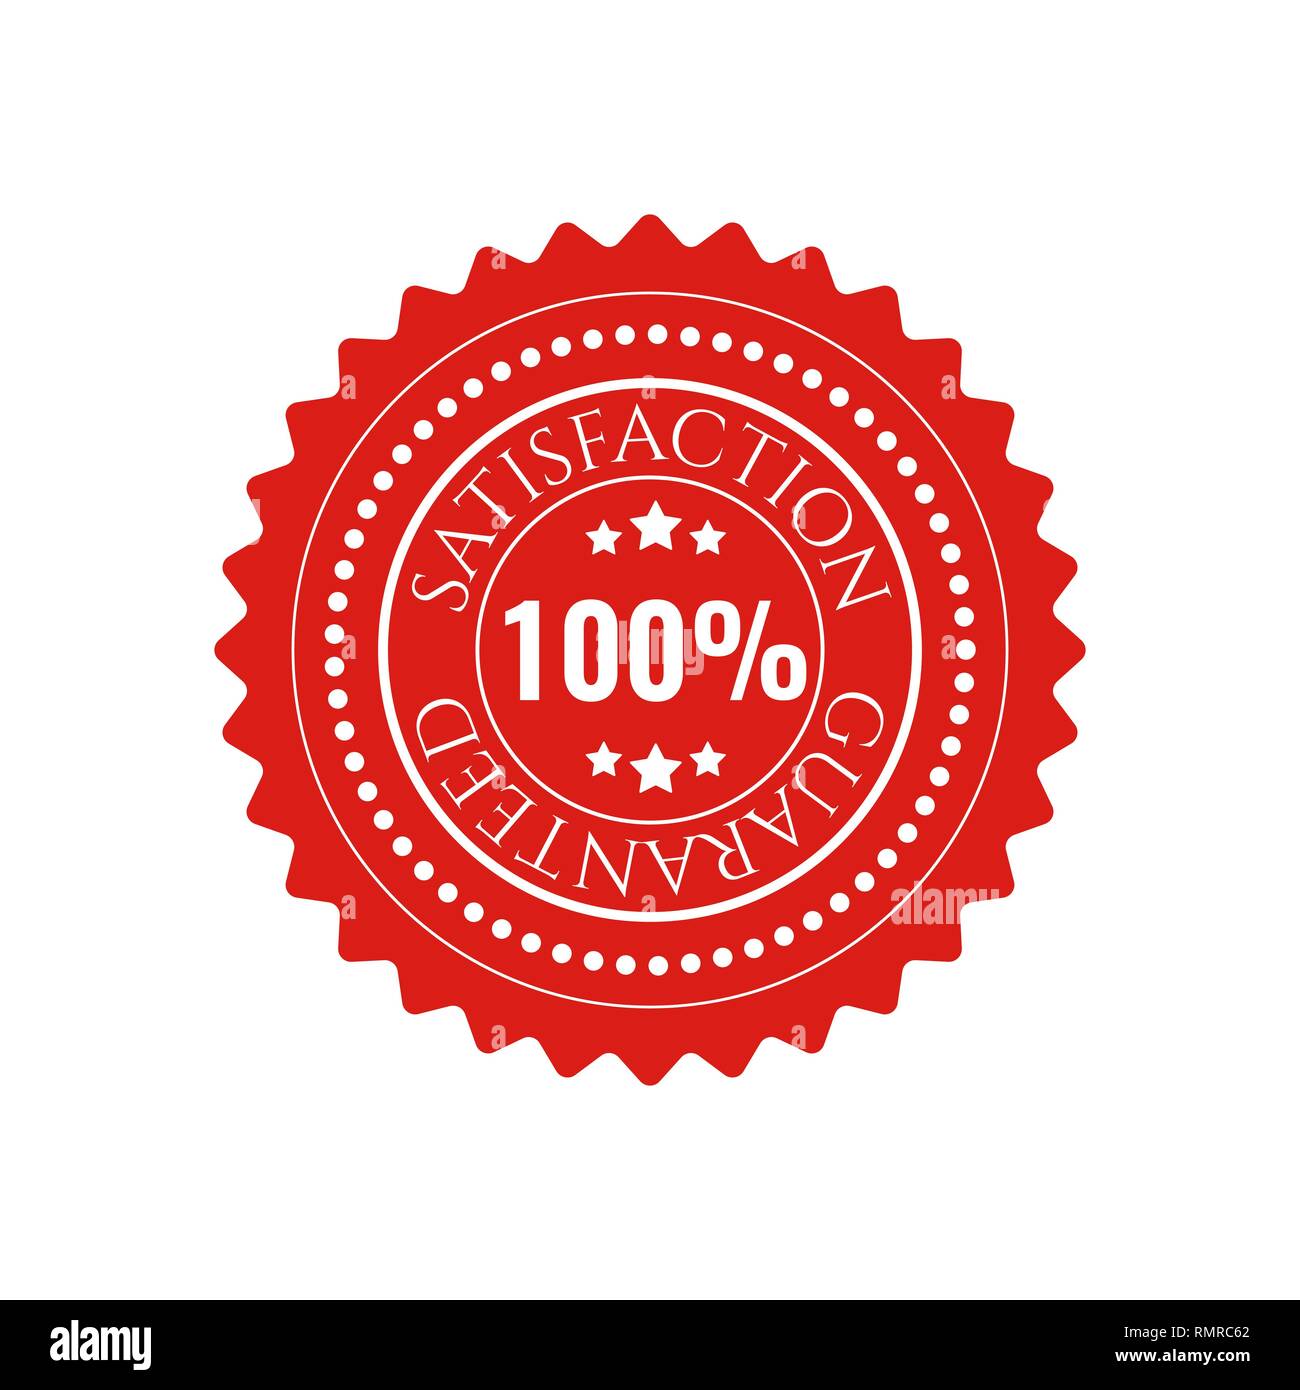 satisfaction guaranteed circle seal stamp on white background Stock Vector